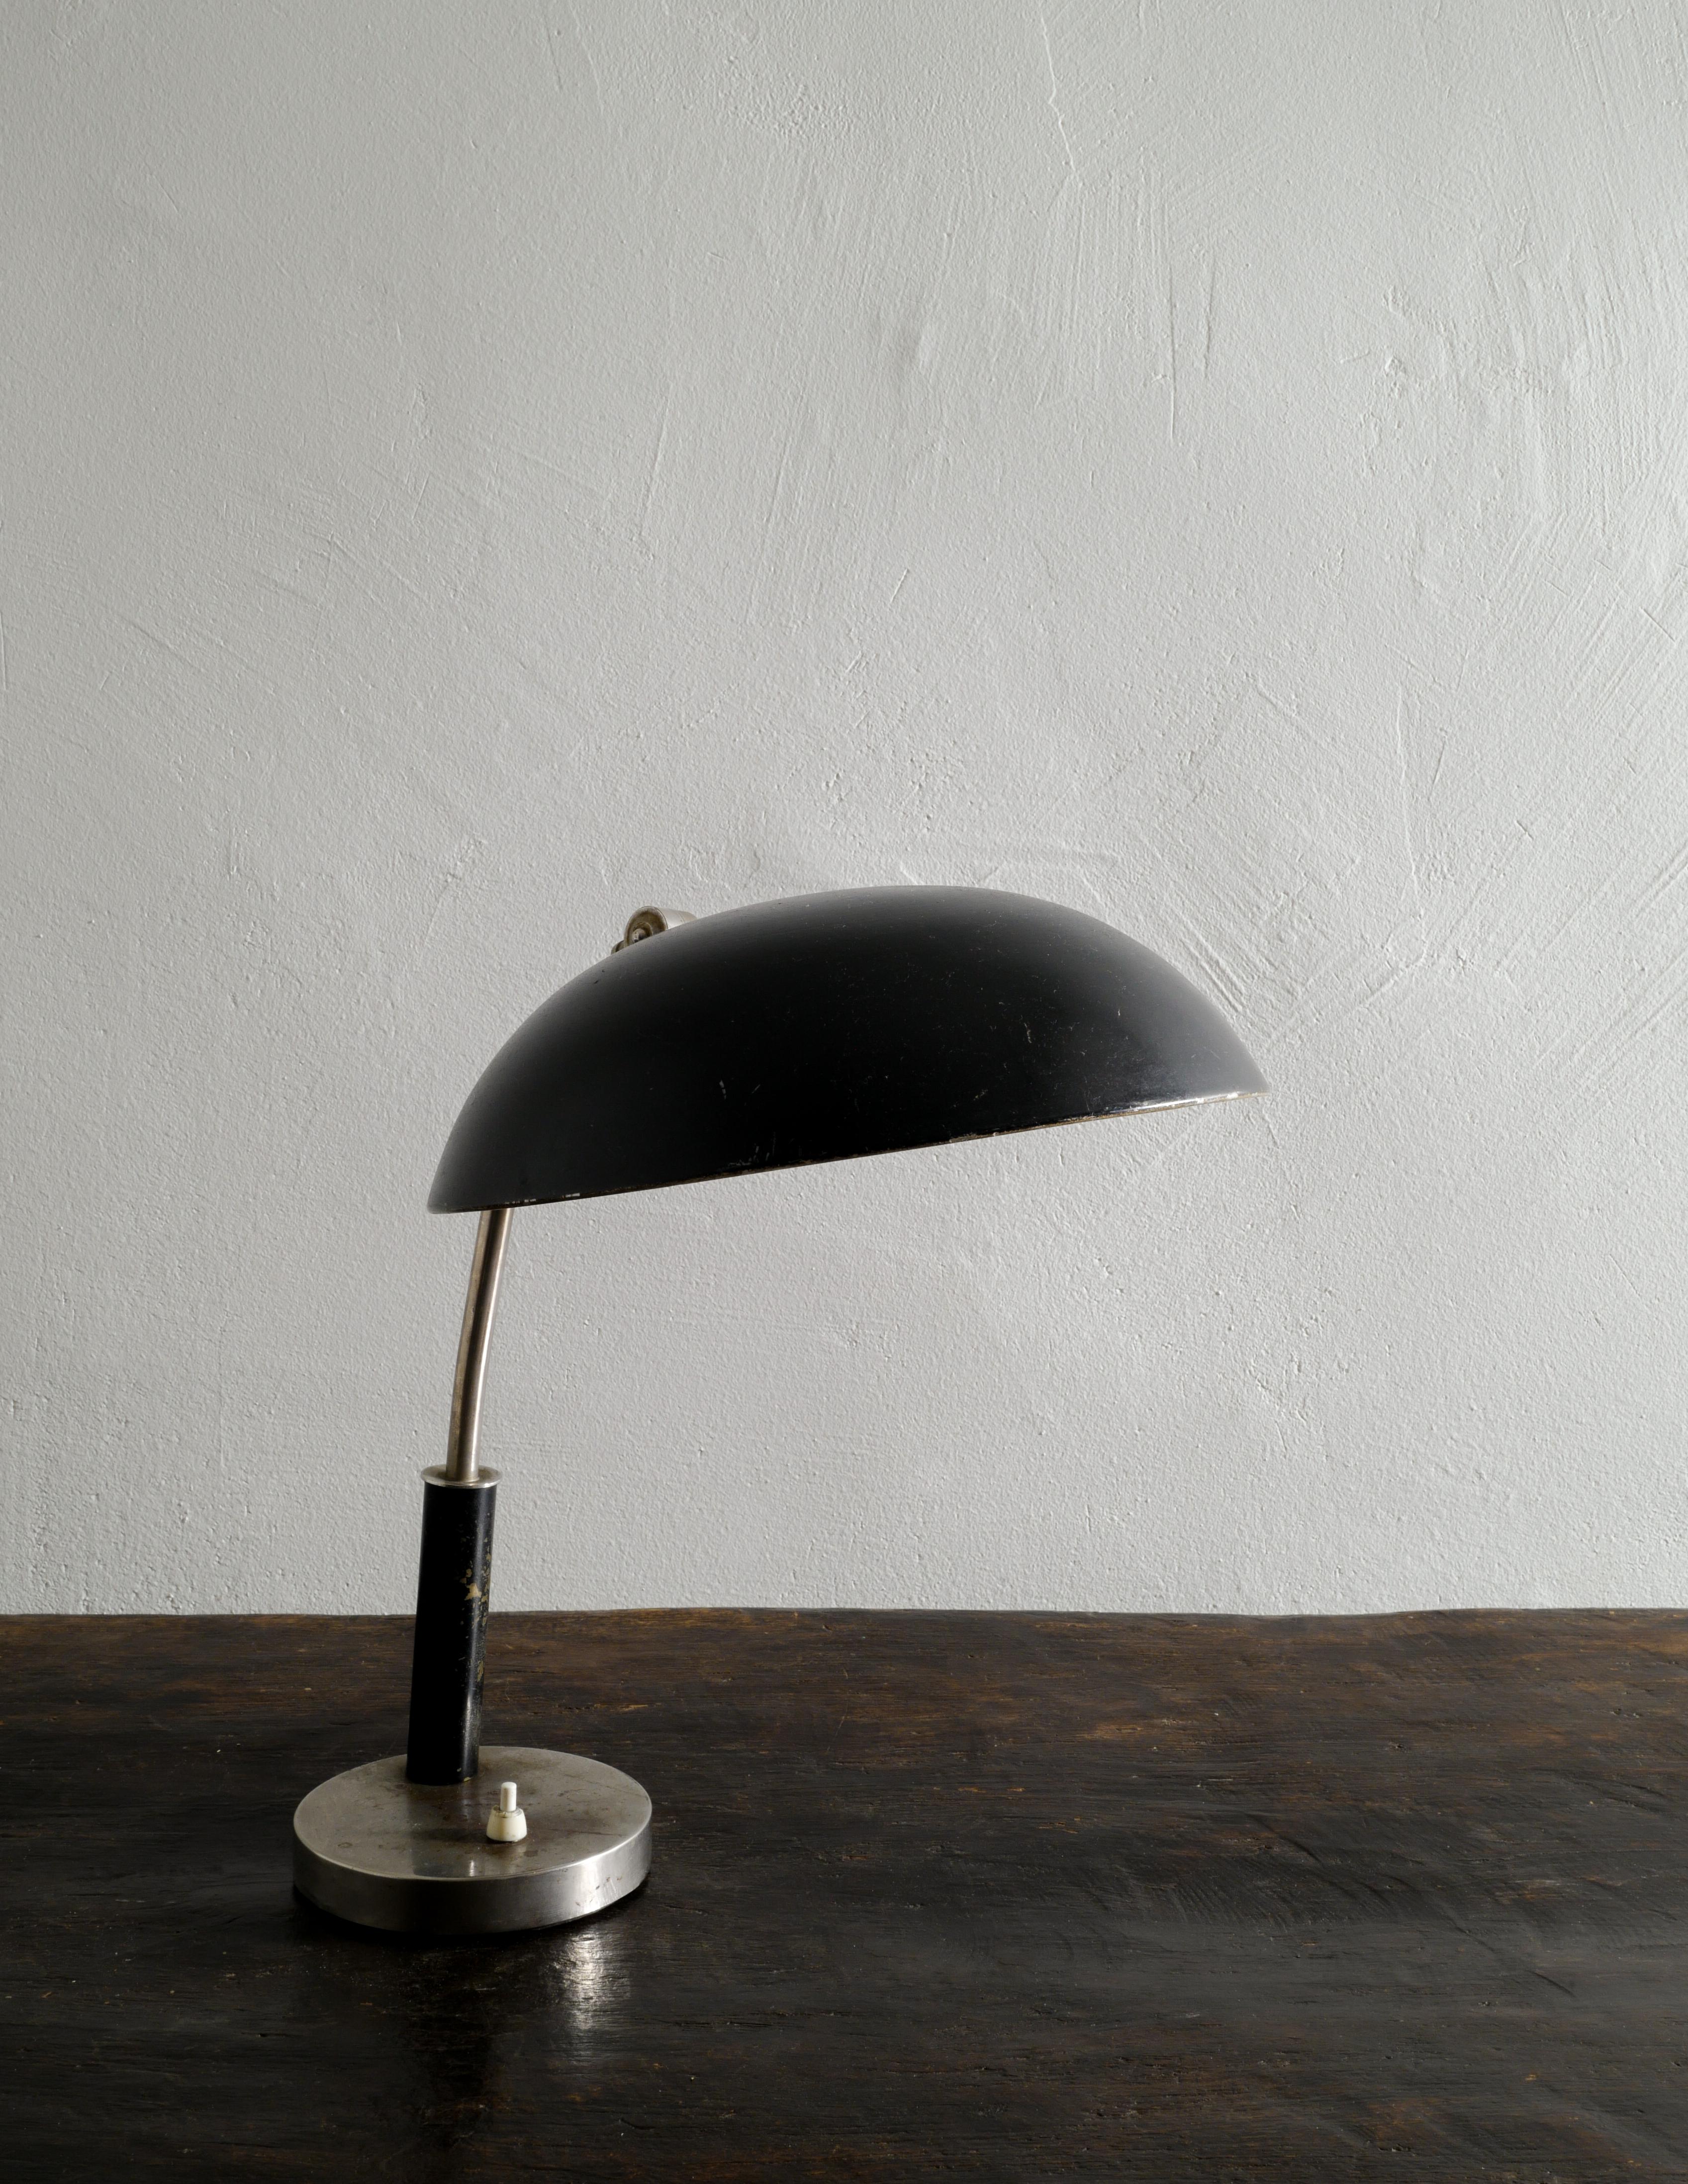 Rare and beautiful mid-century / Art Déco table desk lamp in metal produced in Sweden during the 1940s. In good vintage and original condition with patina from age and use. Working well. 

Dimensions: H: 38 cm W: 28 cm D: 36 cm.

